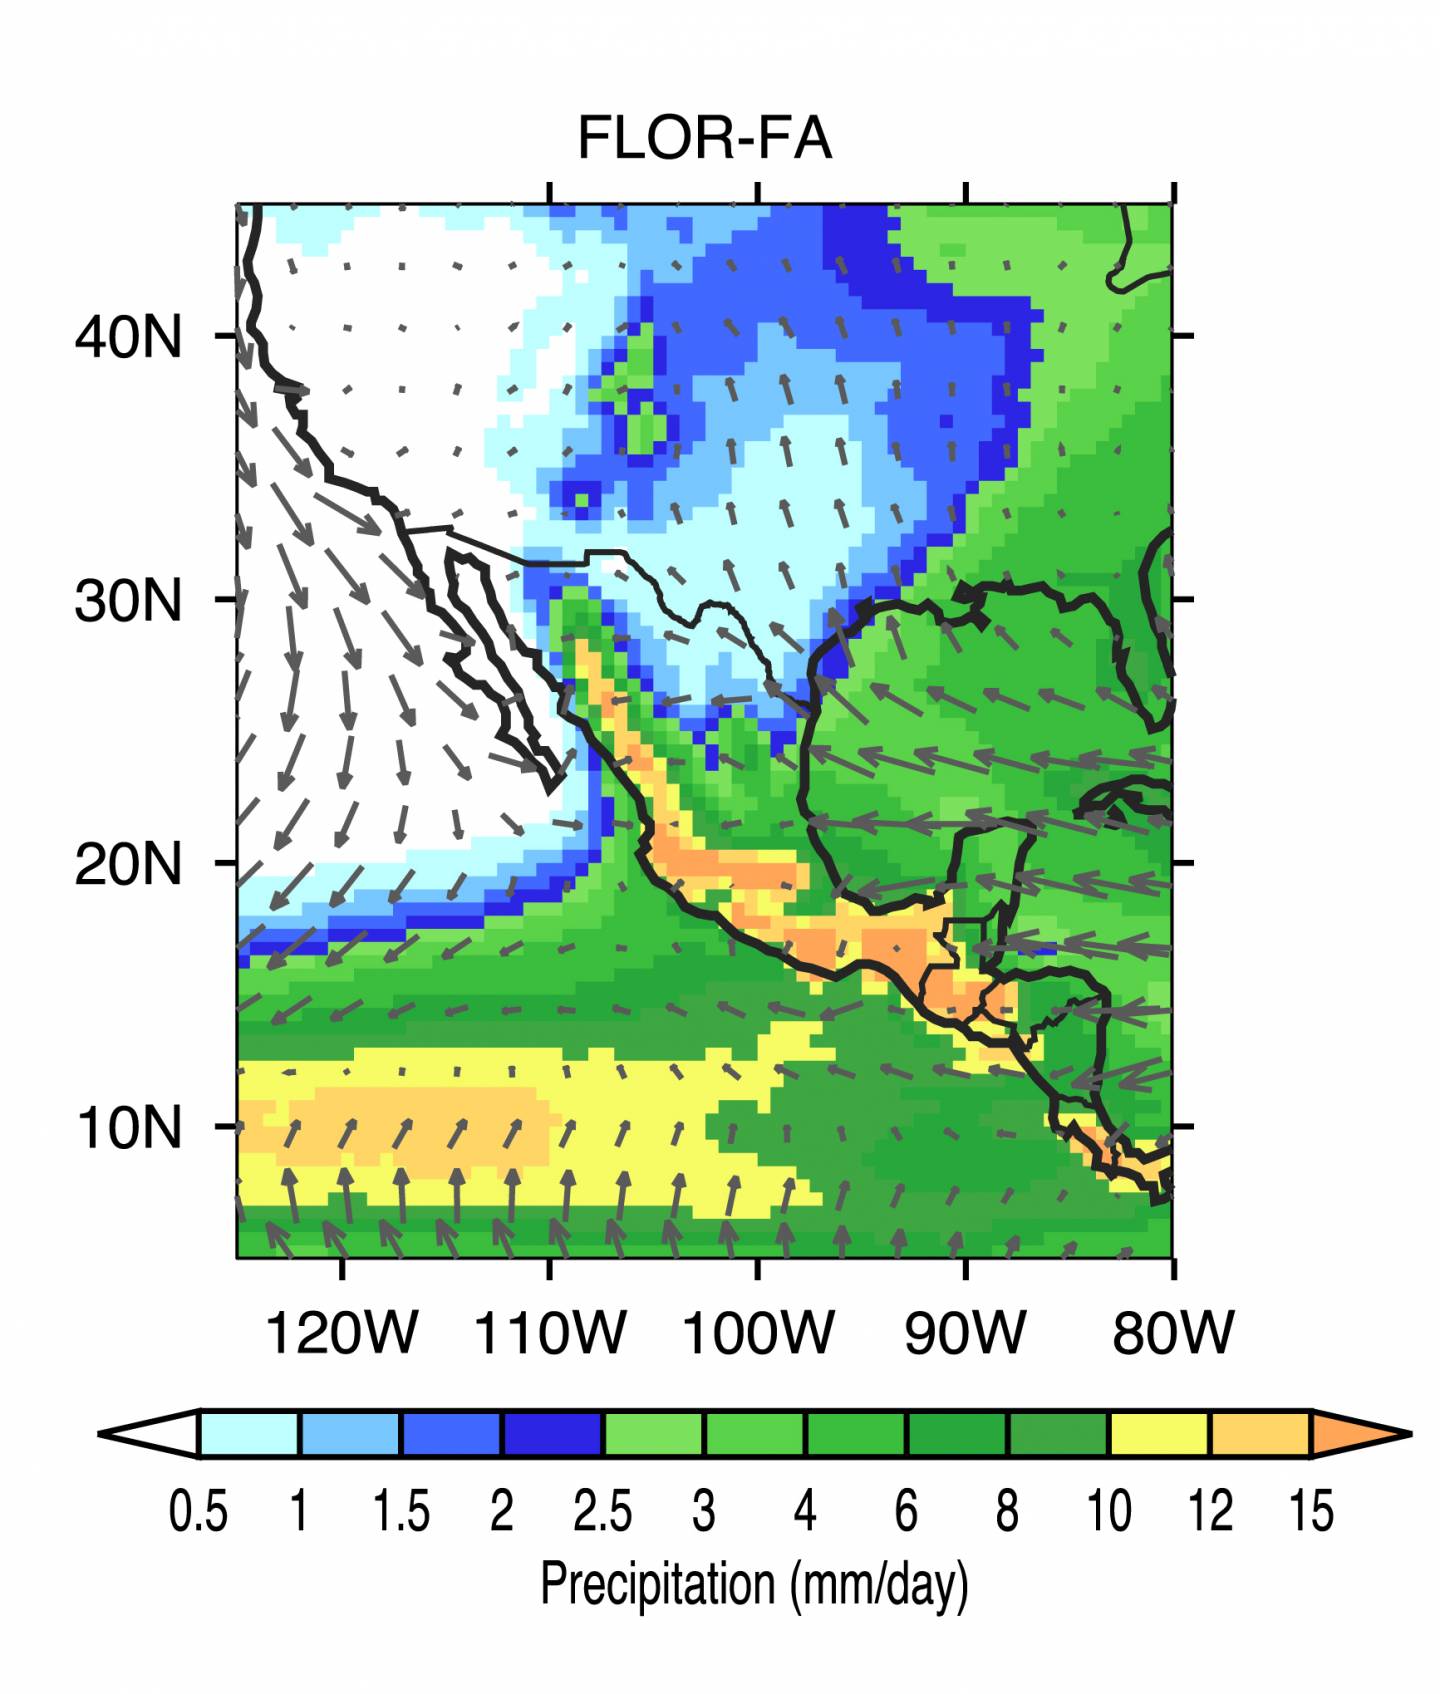 North American Monsoon climate model